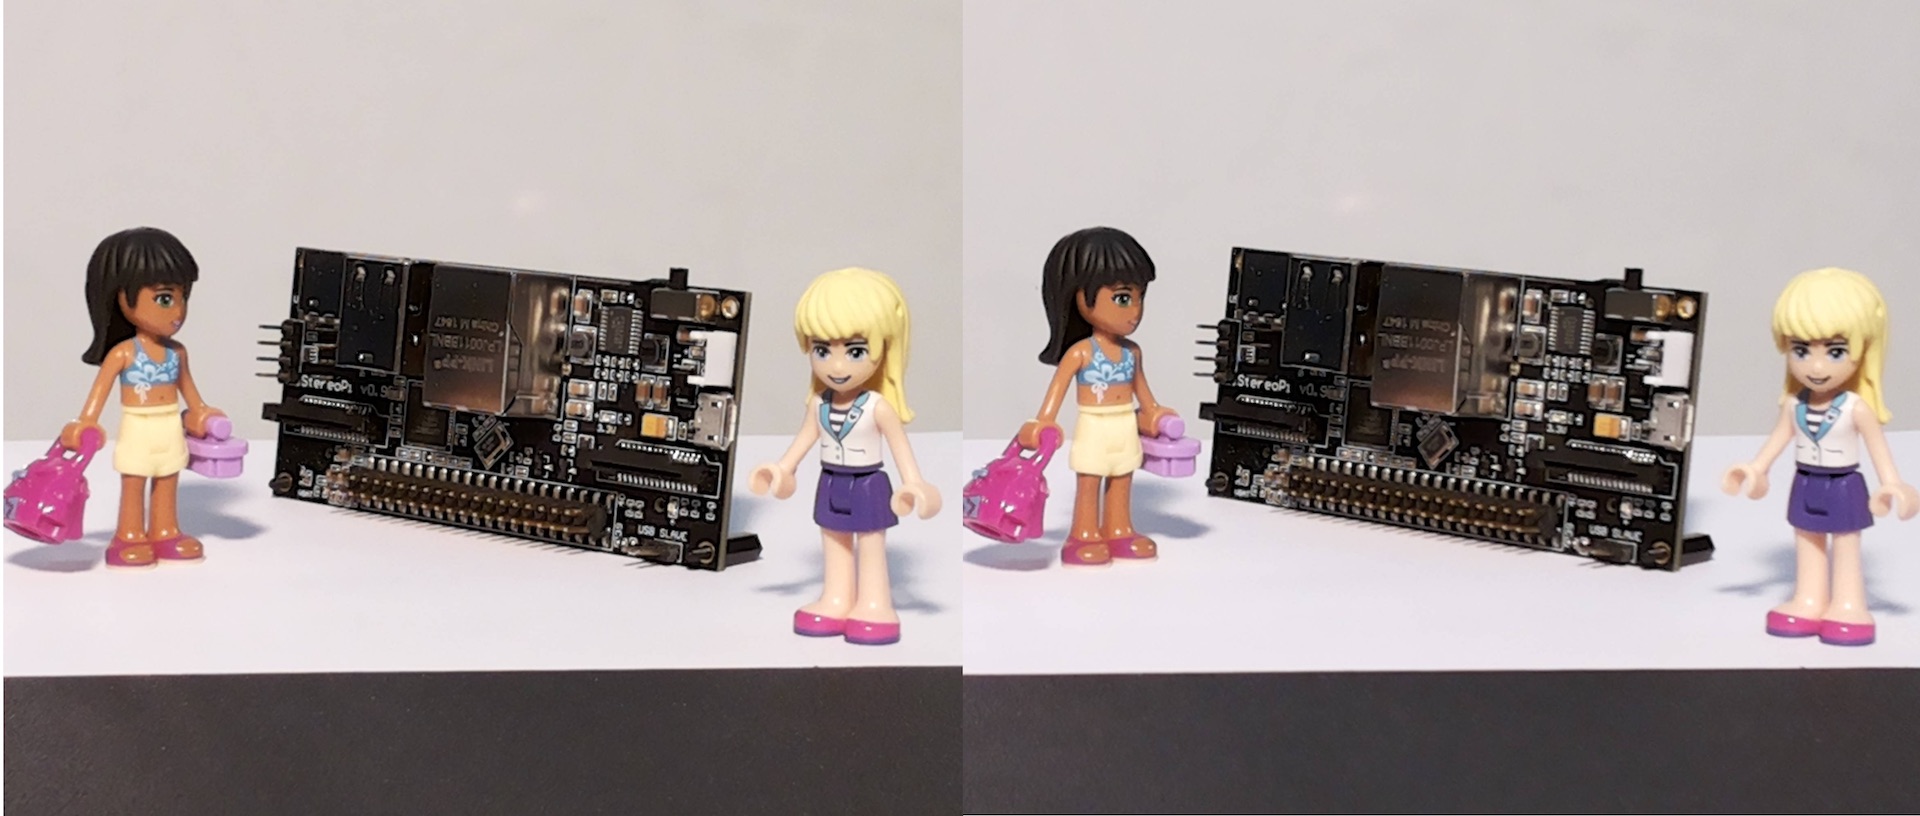 the stereopi and lego girls, r-l stereoscopic image